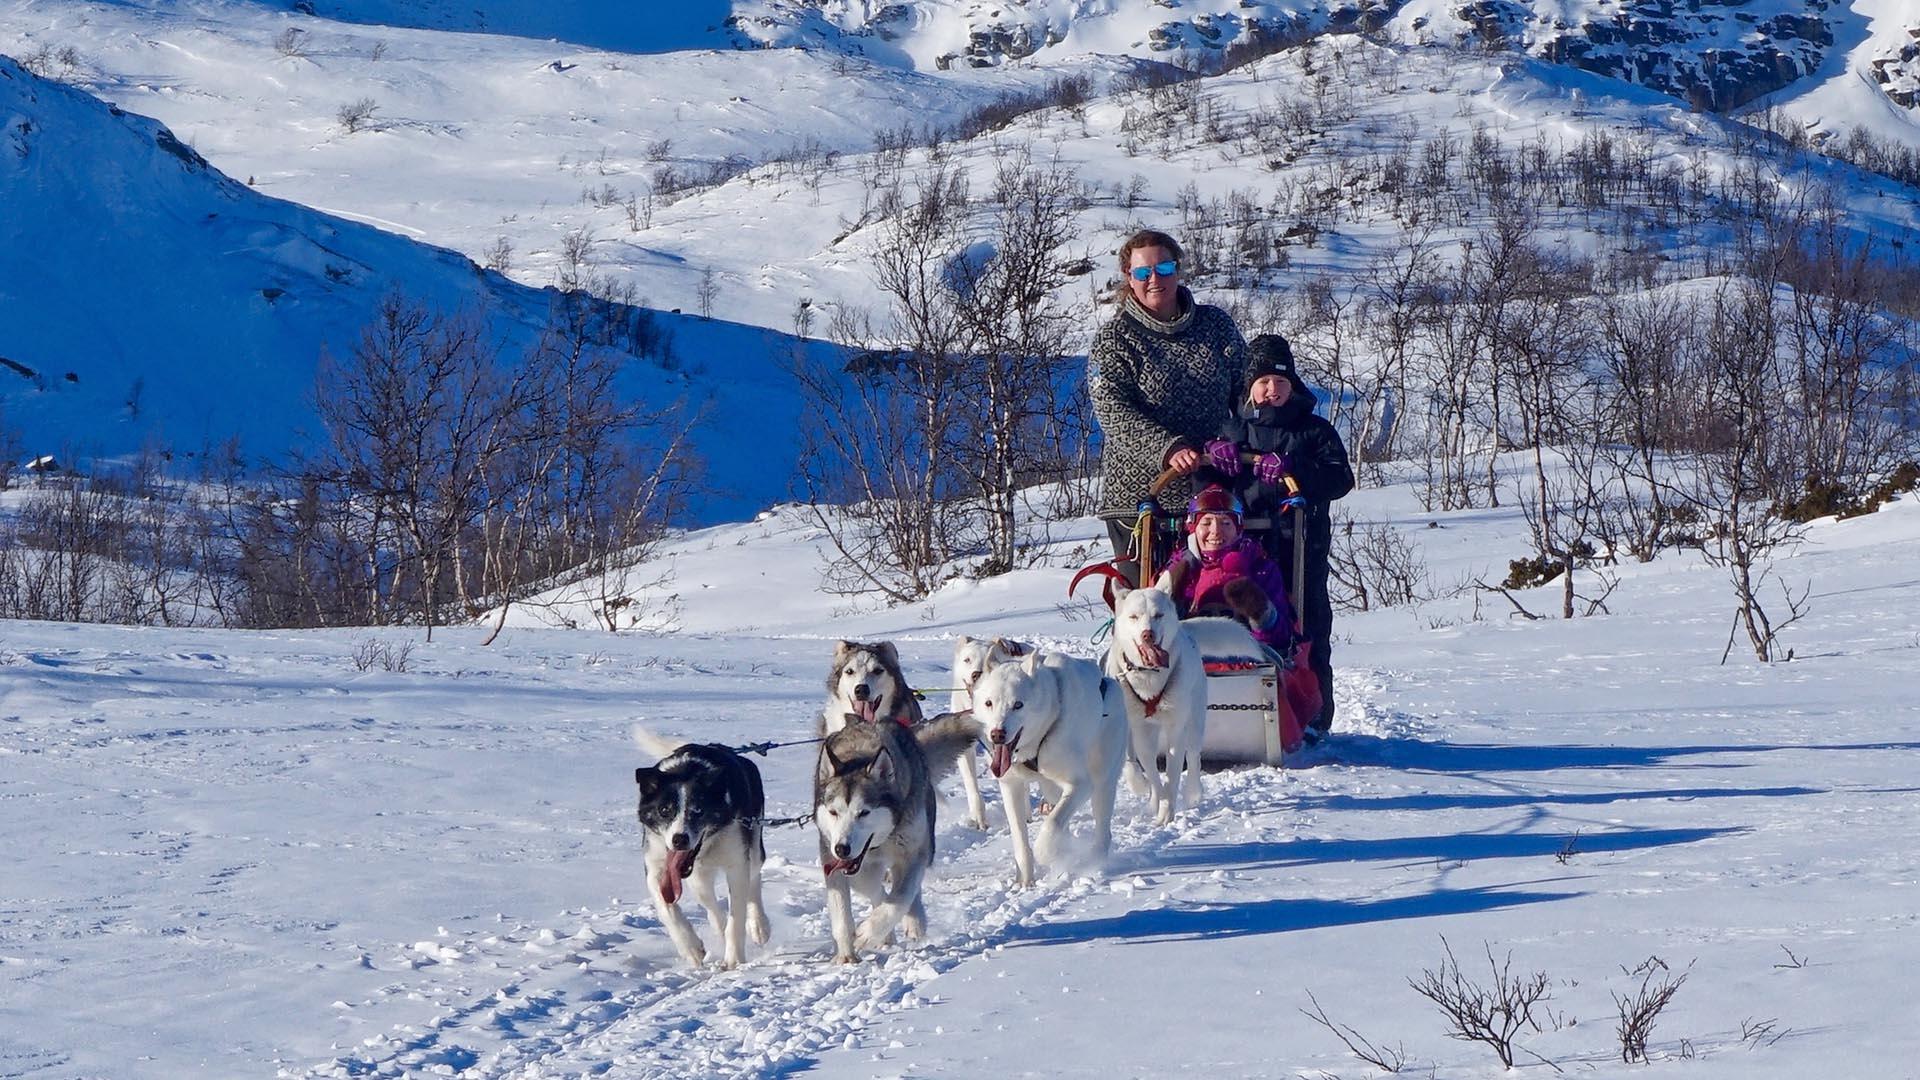 A dog sled with two children as passengers in addition to the guide is racing towards the photographer in a snow-covered landscape.